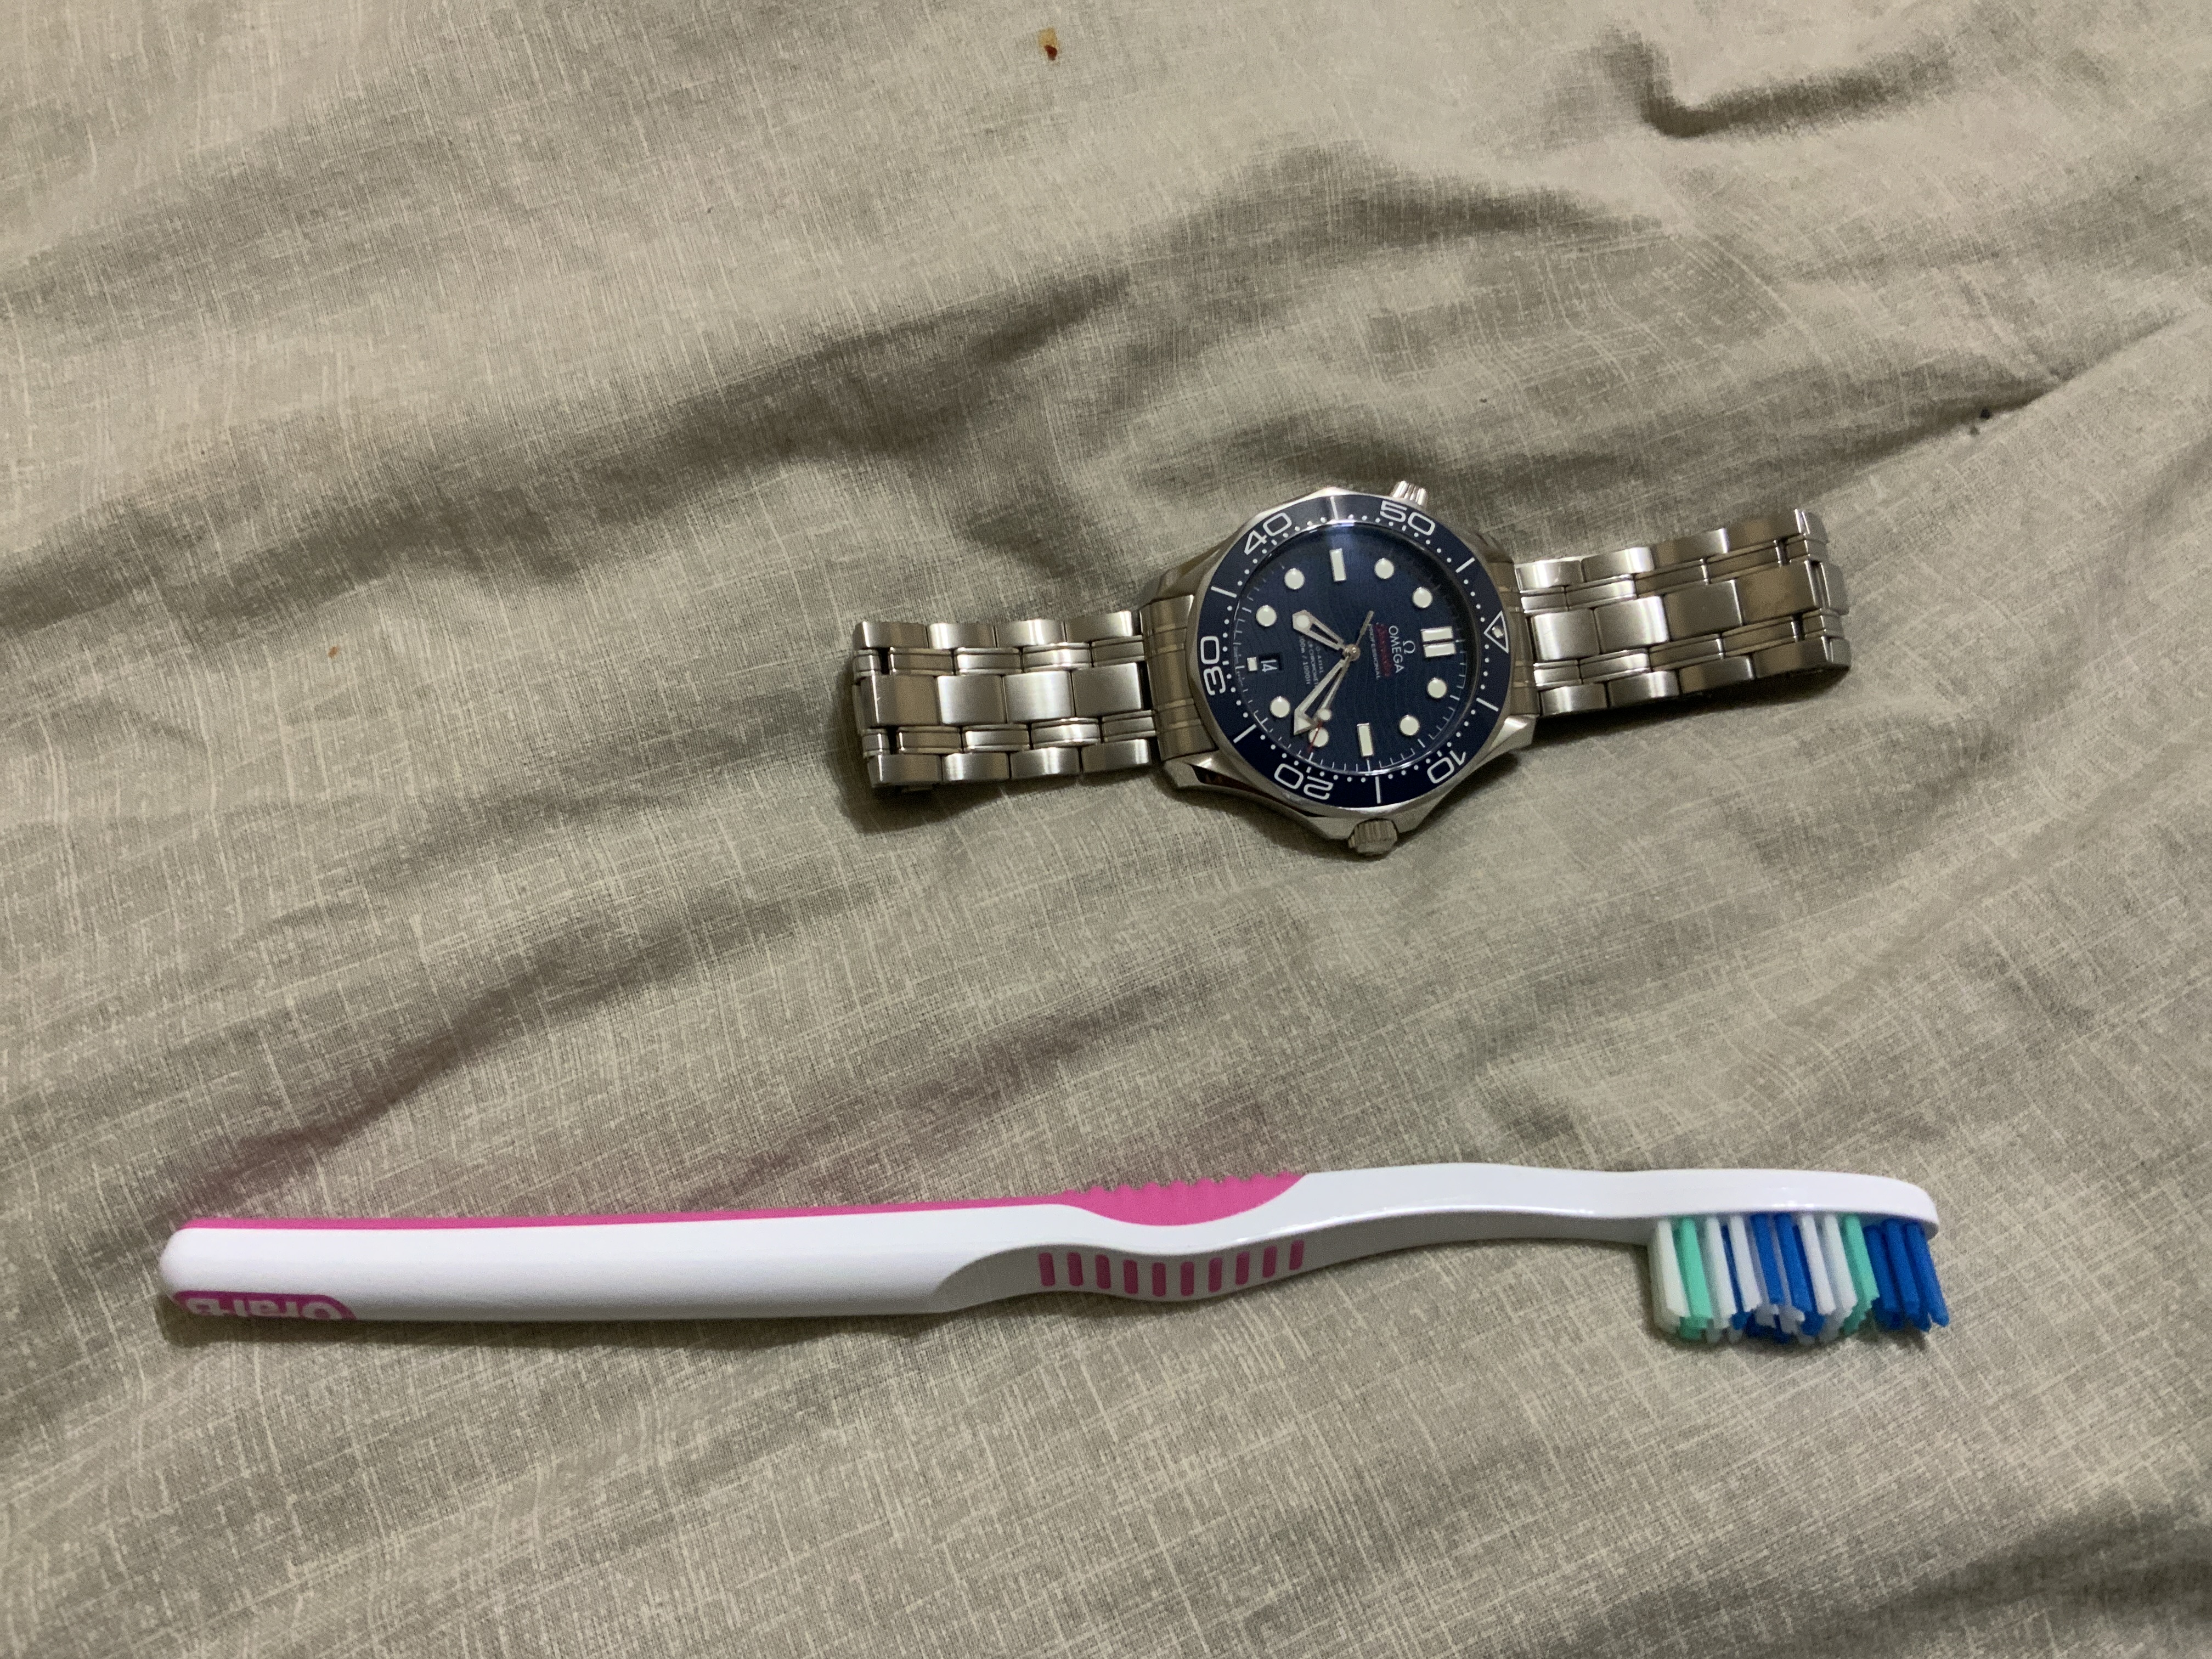 Watch cleaning brush question